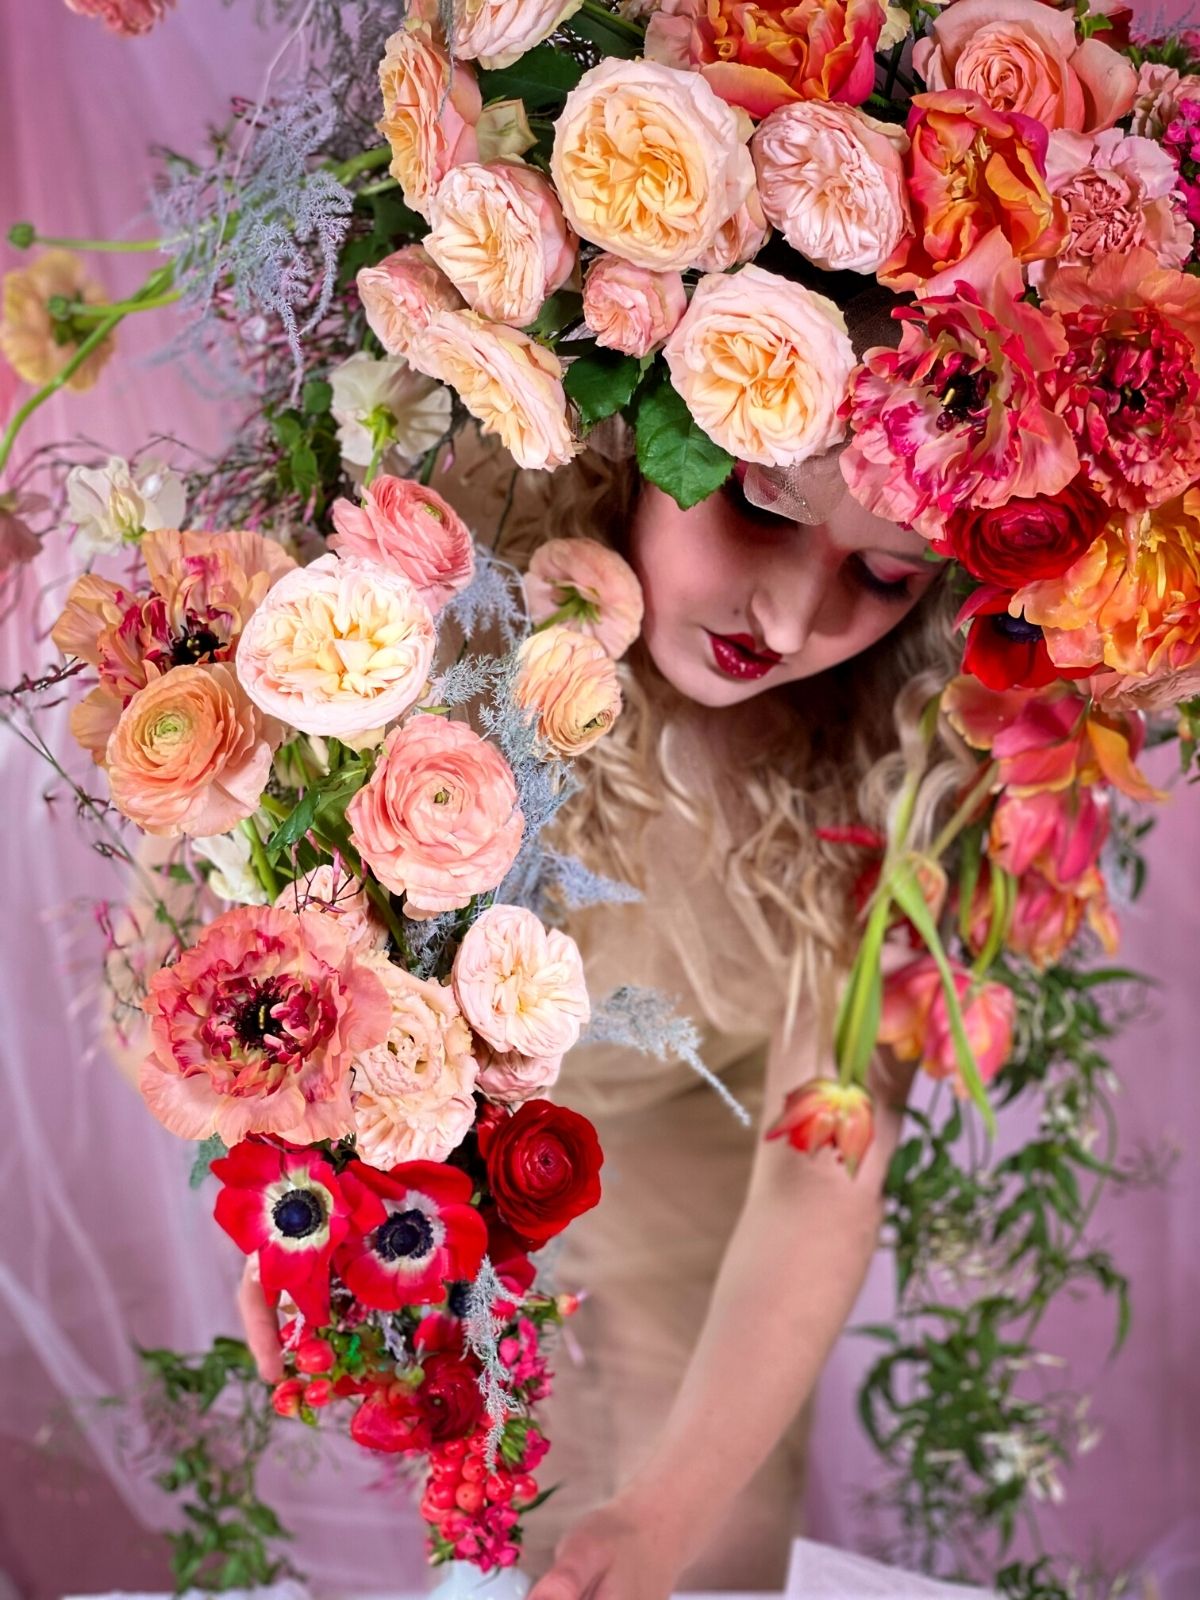 A girl getting a woman, surrounded with life, with flowers  - Beth O'Reilly - Blog  on Thursd